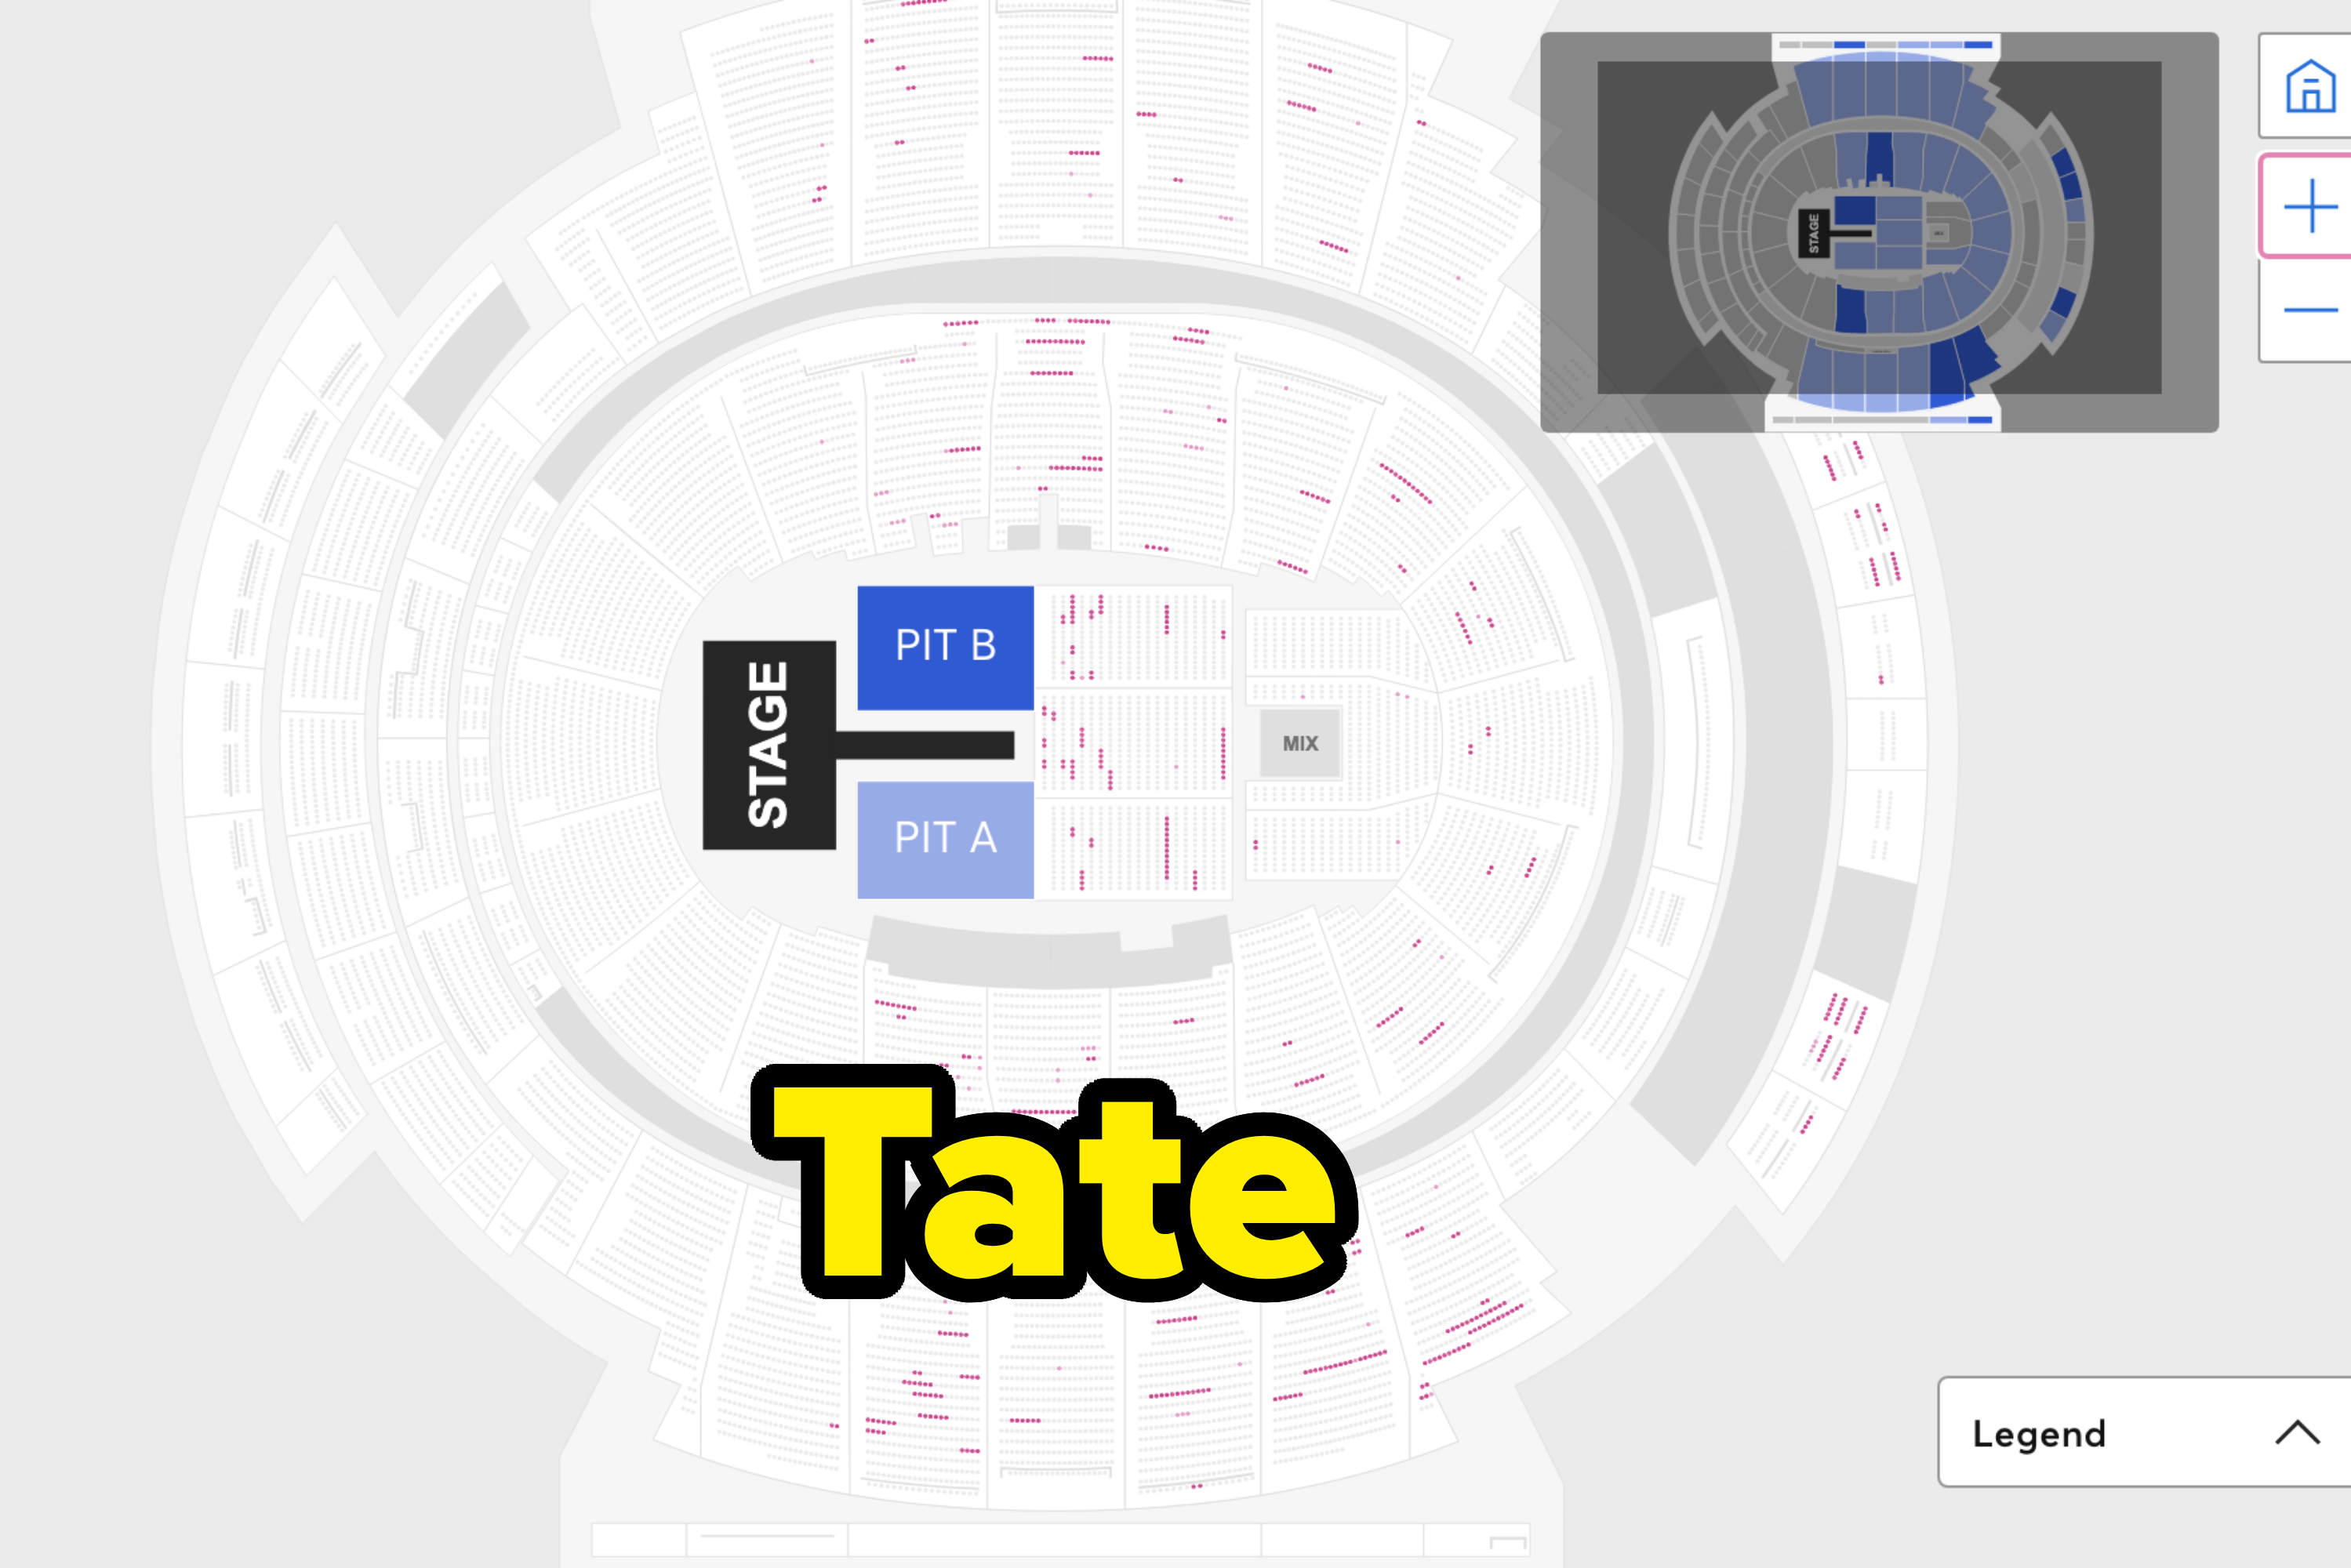 Seating chart for a concert venue with stage placement and various sections labeled